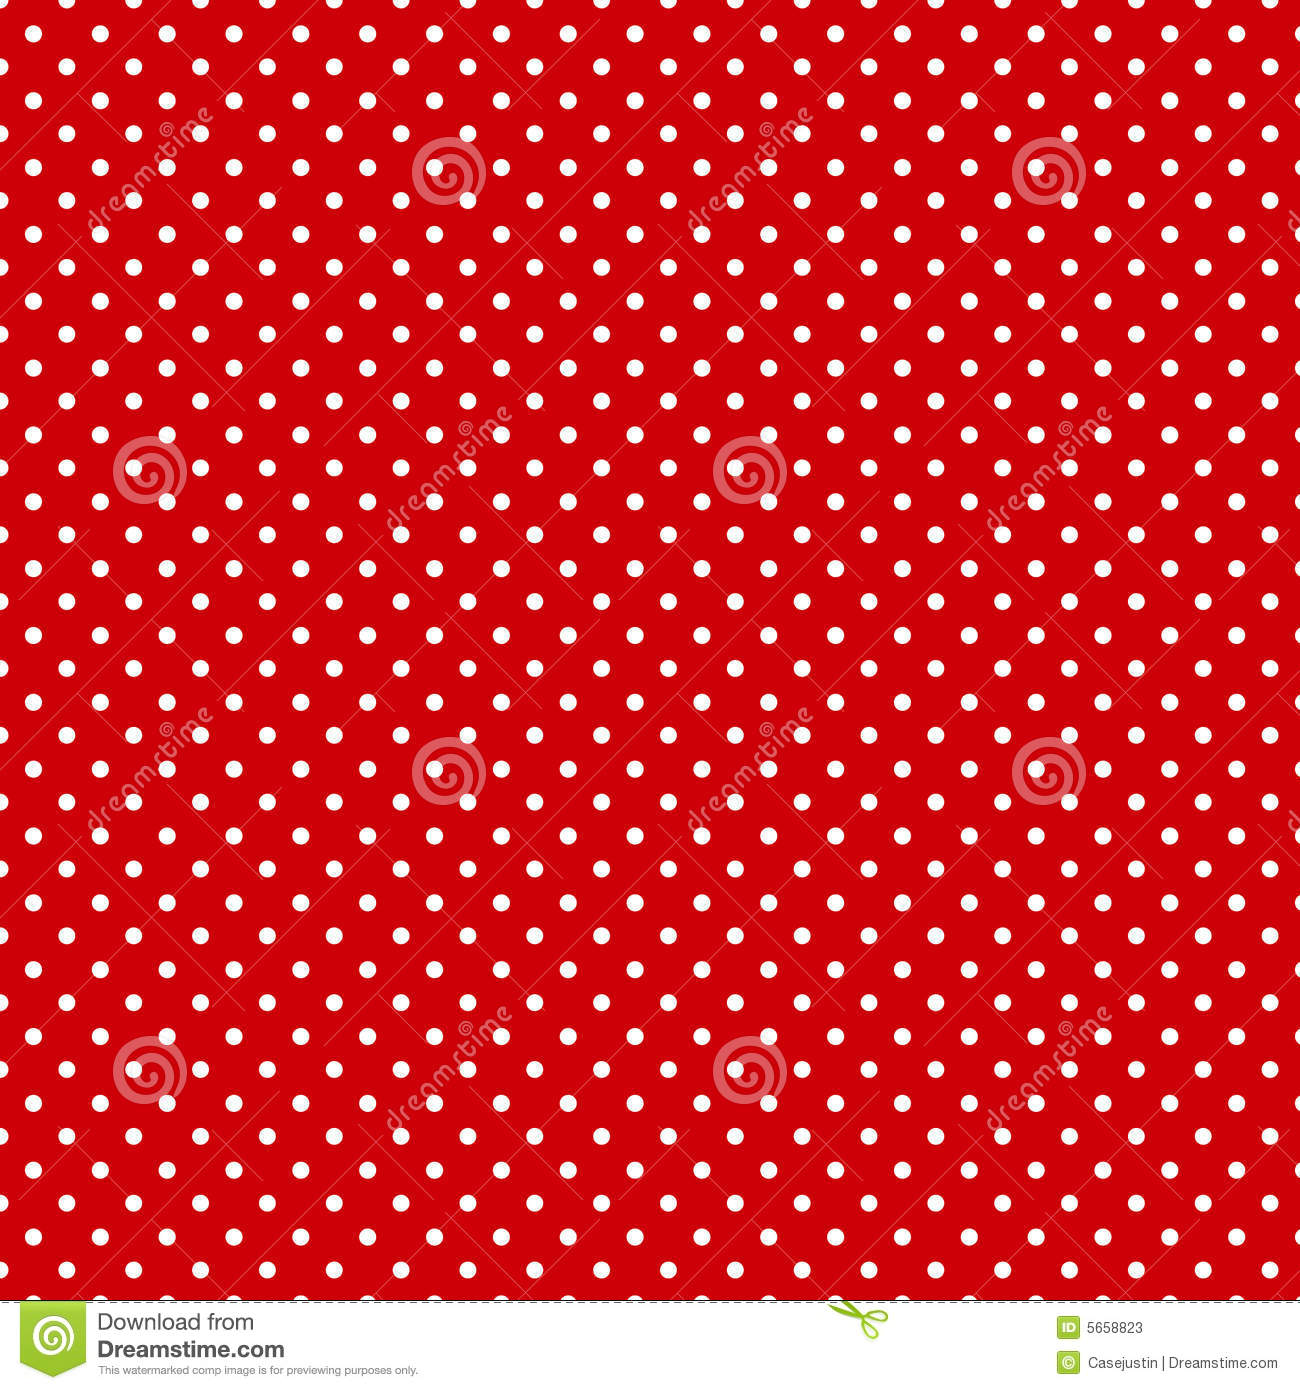 Seamless Pattern Of Small White Polka Dots On A Bright Red Background